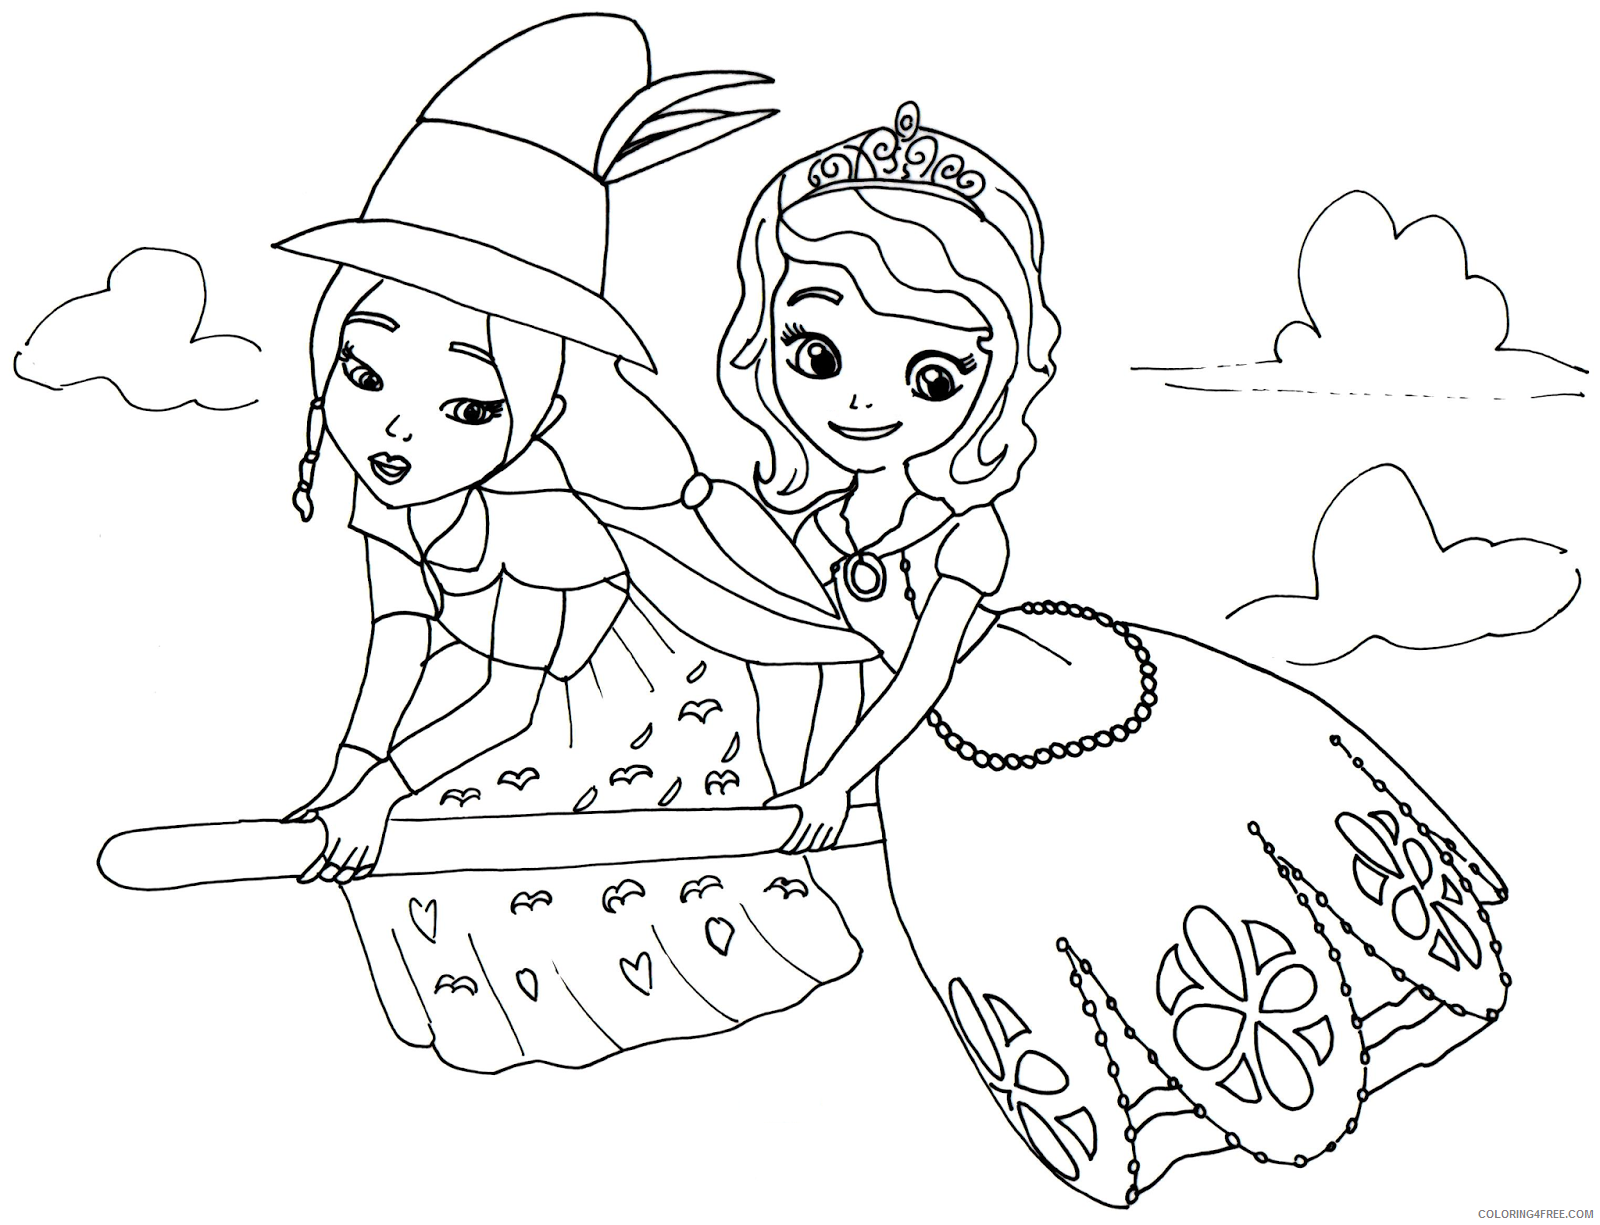 princess sofia coloring pages with lucinda Coloring4free